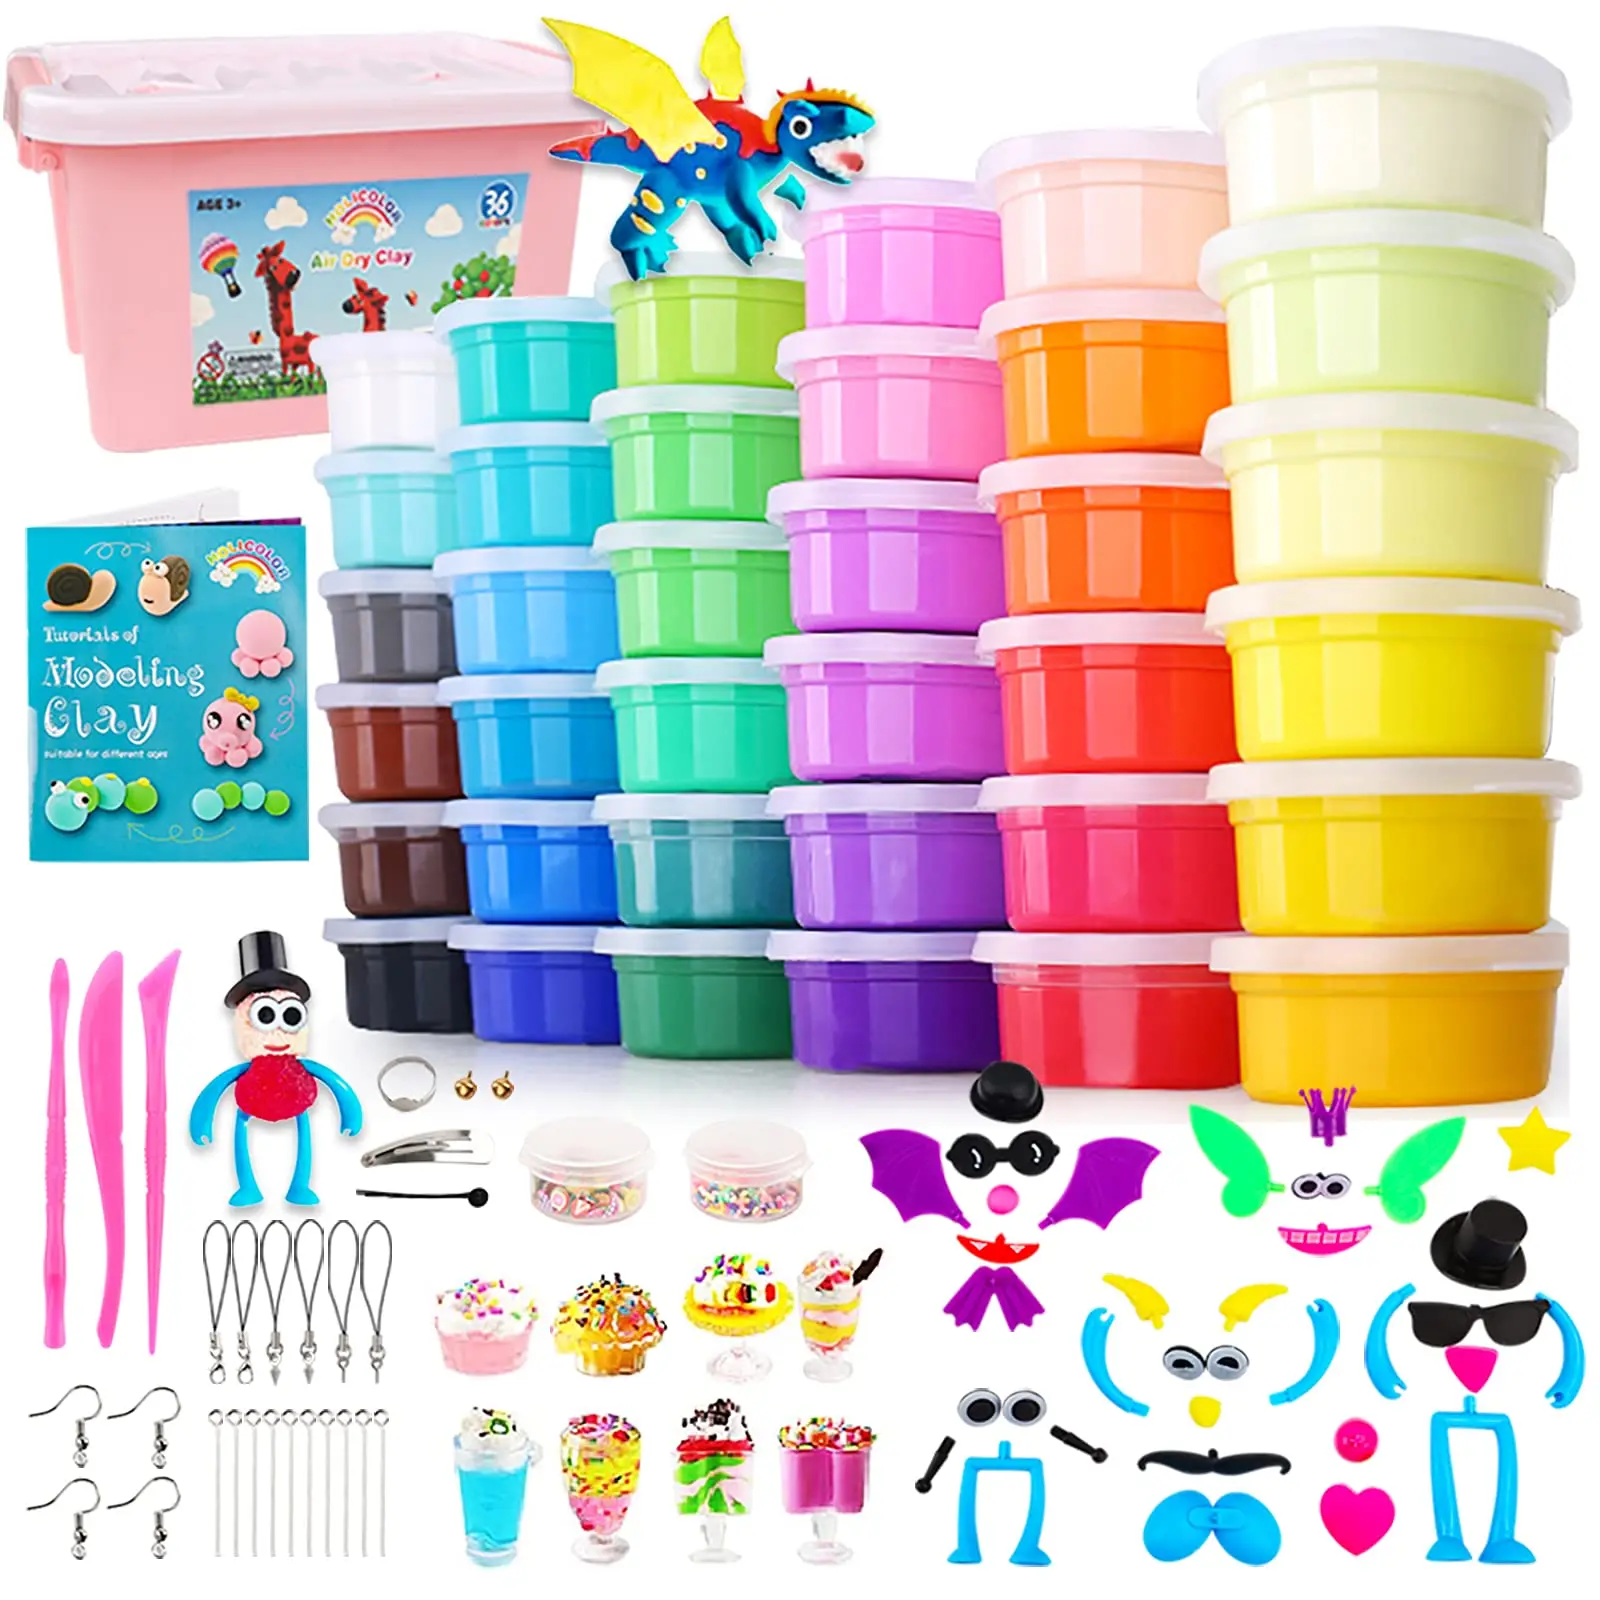 Air Dry Clay 36 Colors- Soft & Ultra Light Modeling Magical Clay for Kids, No Bake Clay with Tools, Adult Unisex